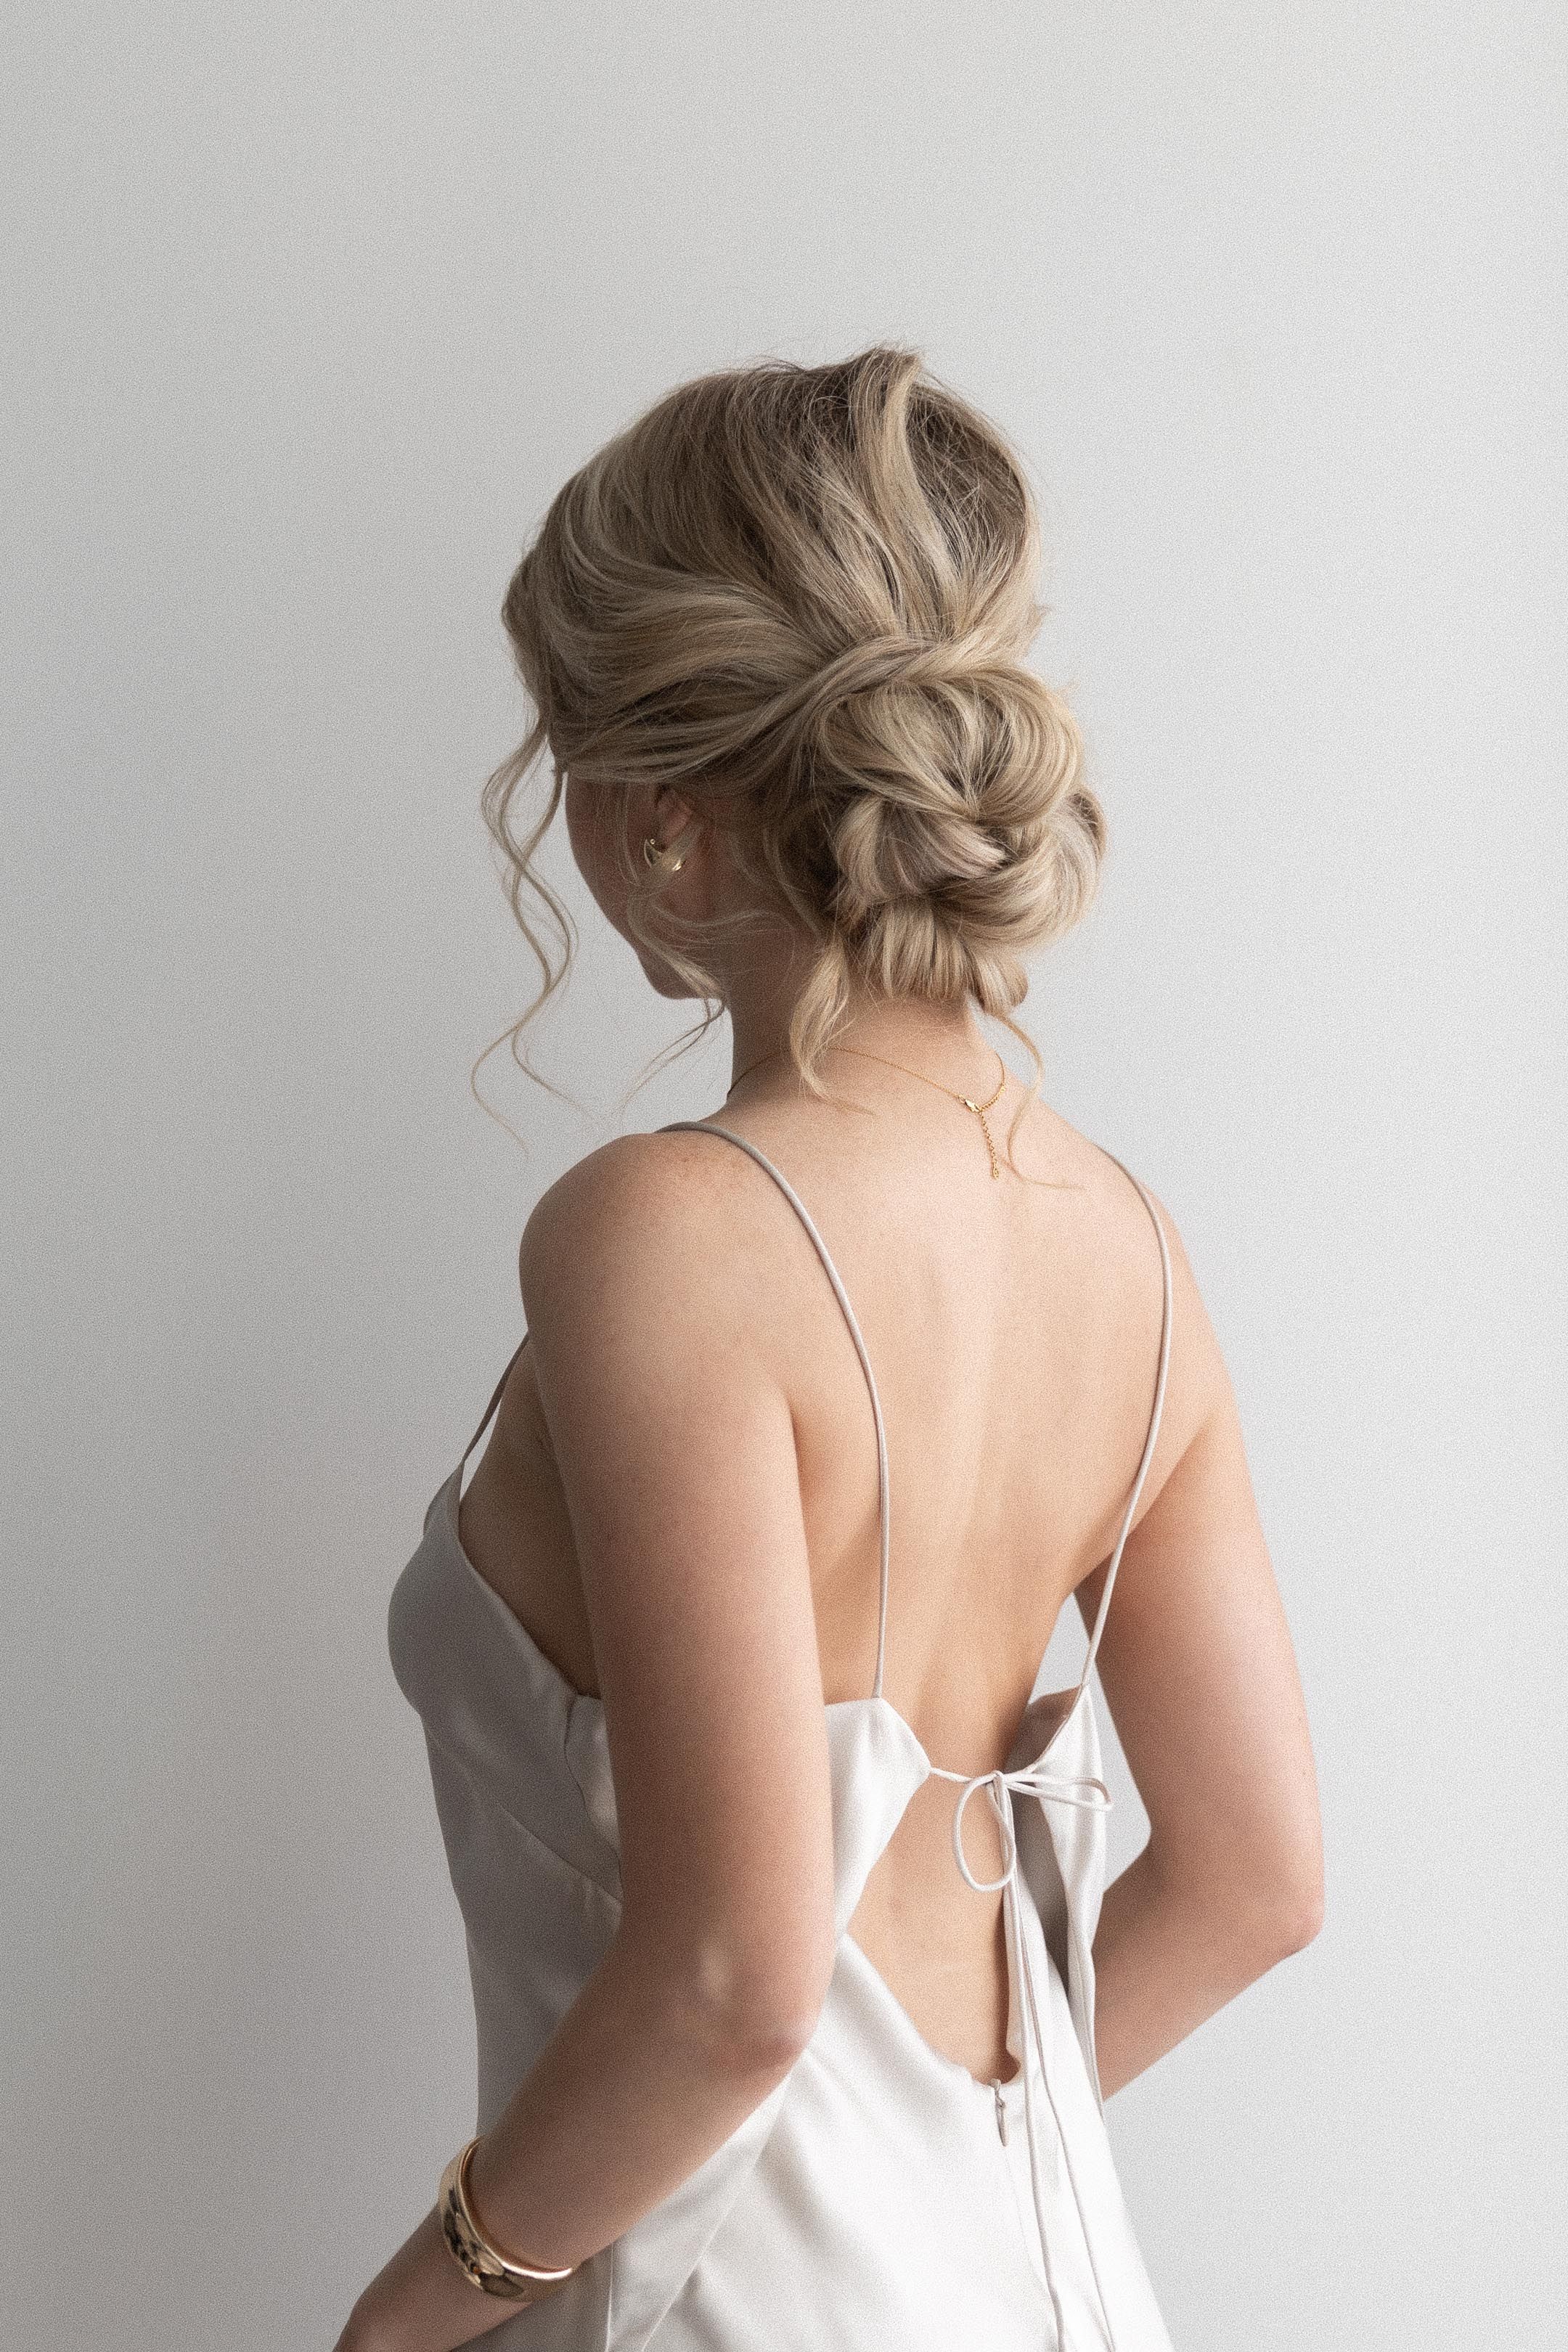 Wedding, Bridesmaid – Alex Gaboury Pertaining To Most Popular Bridesmaid’s Updo For Long Hair (View 10 of 15)